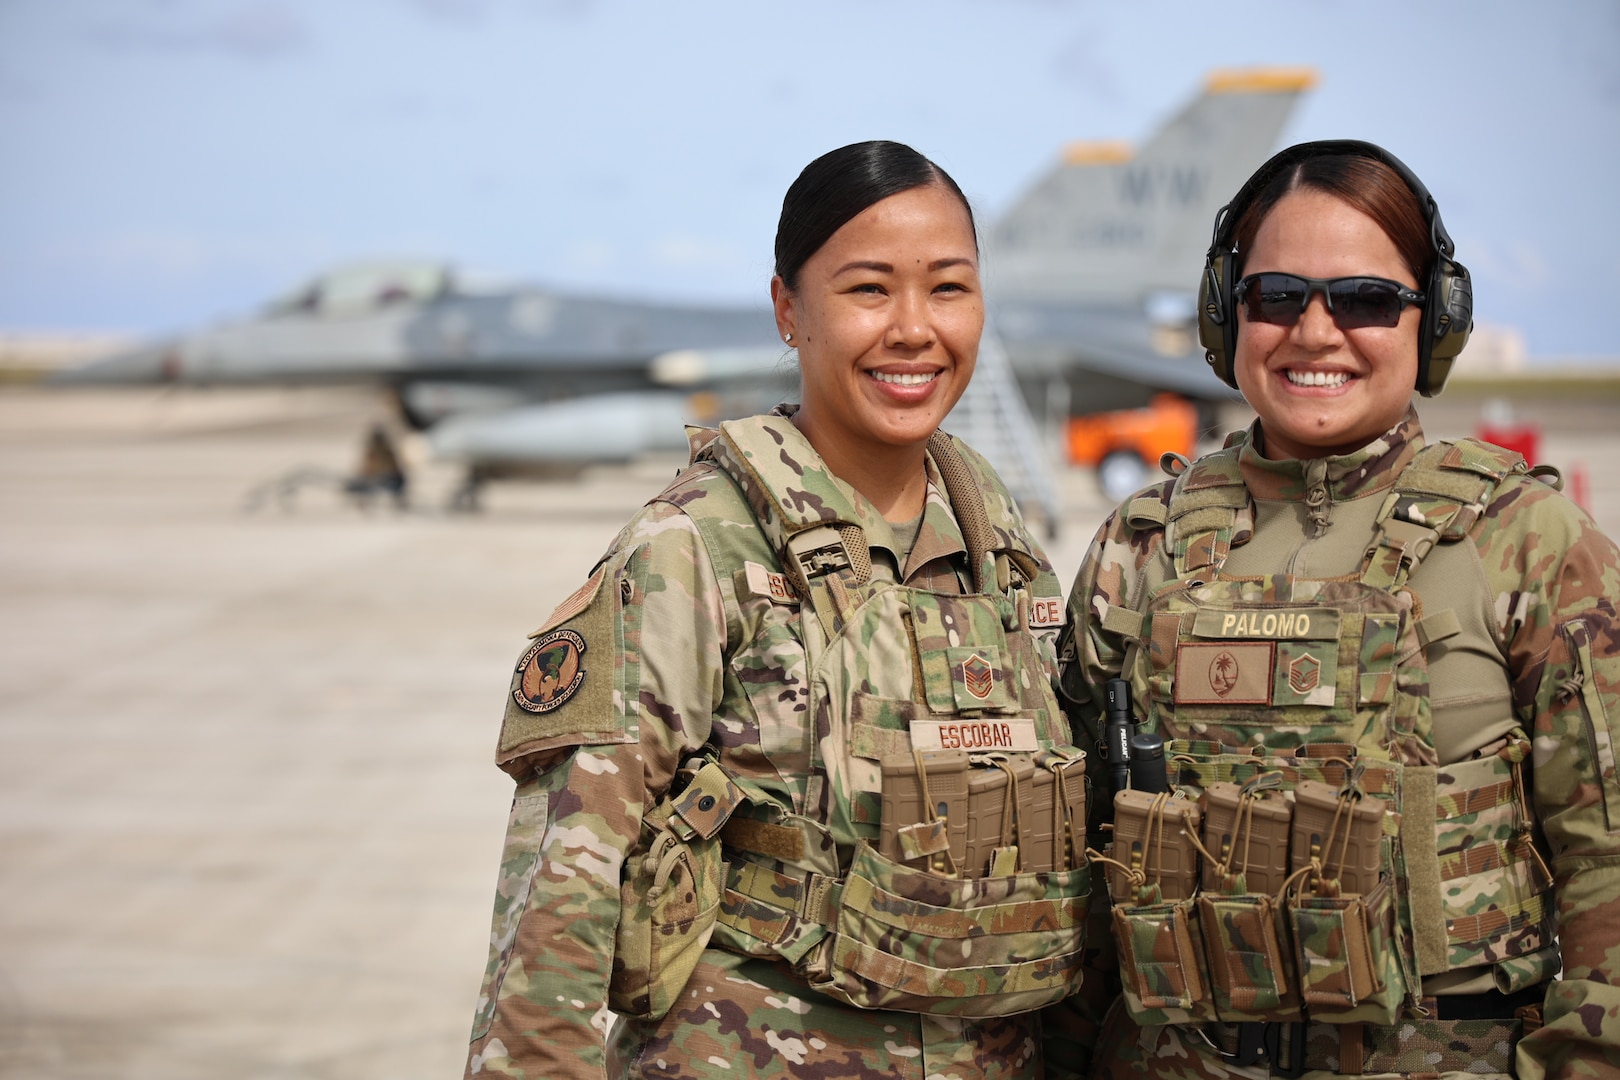 U.S. Air Force Master Sgts. Jordanna Escobar, left, and Misty Palomo of the Guam Air National Guard 254th Security Forces Squadron pull security on a U.S. Air Force F-16 Fighting Falcon at the A.B. Won Pat Guam International Airport during Exercise Cope North, Feb. 9, 2024.